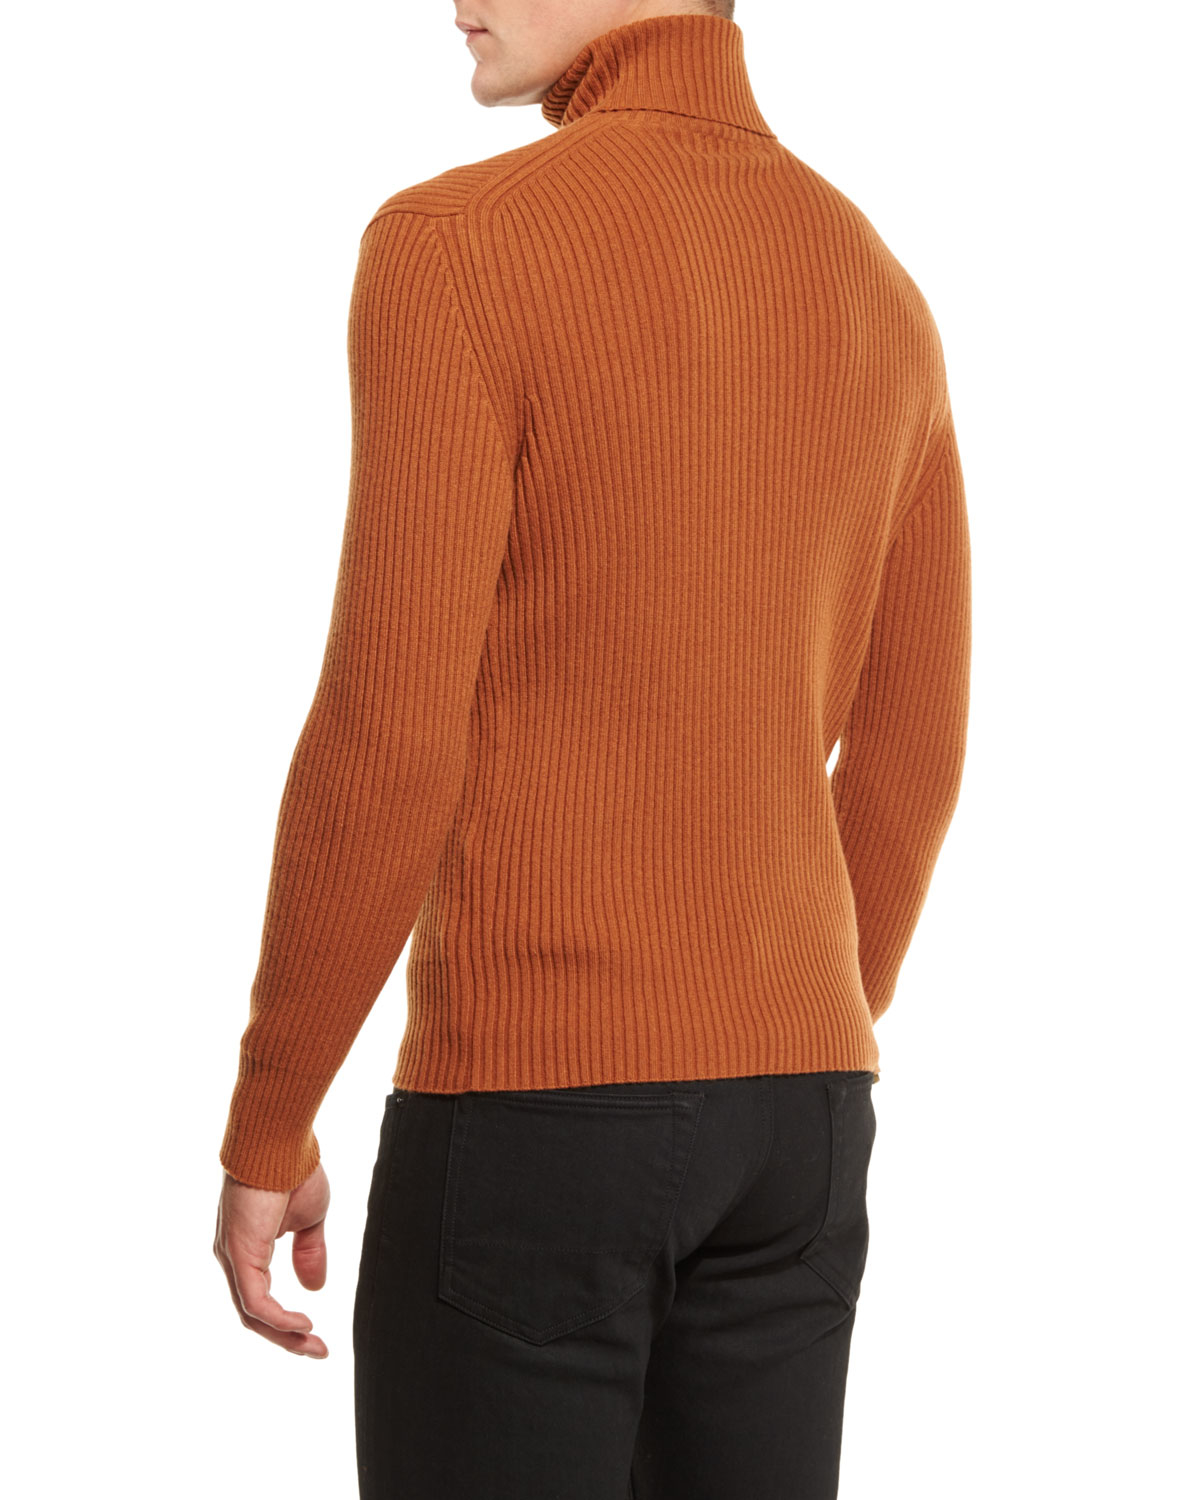 Lyst - Tom Ford Ribbed Turtleneck Sweater in Brown for Men